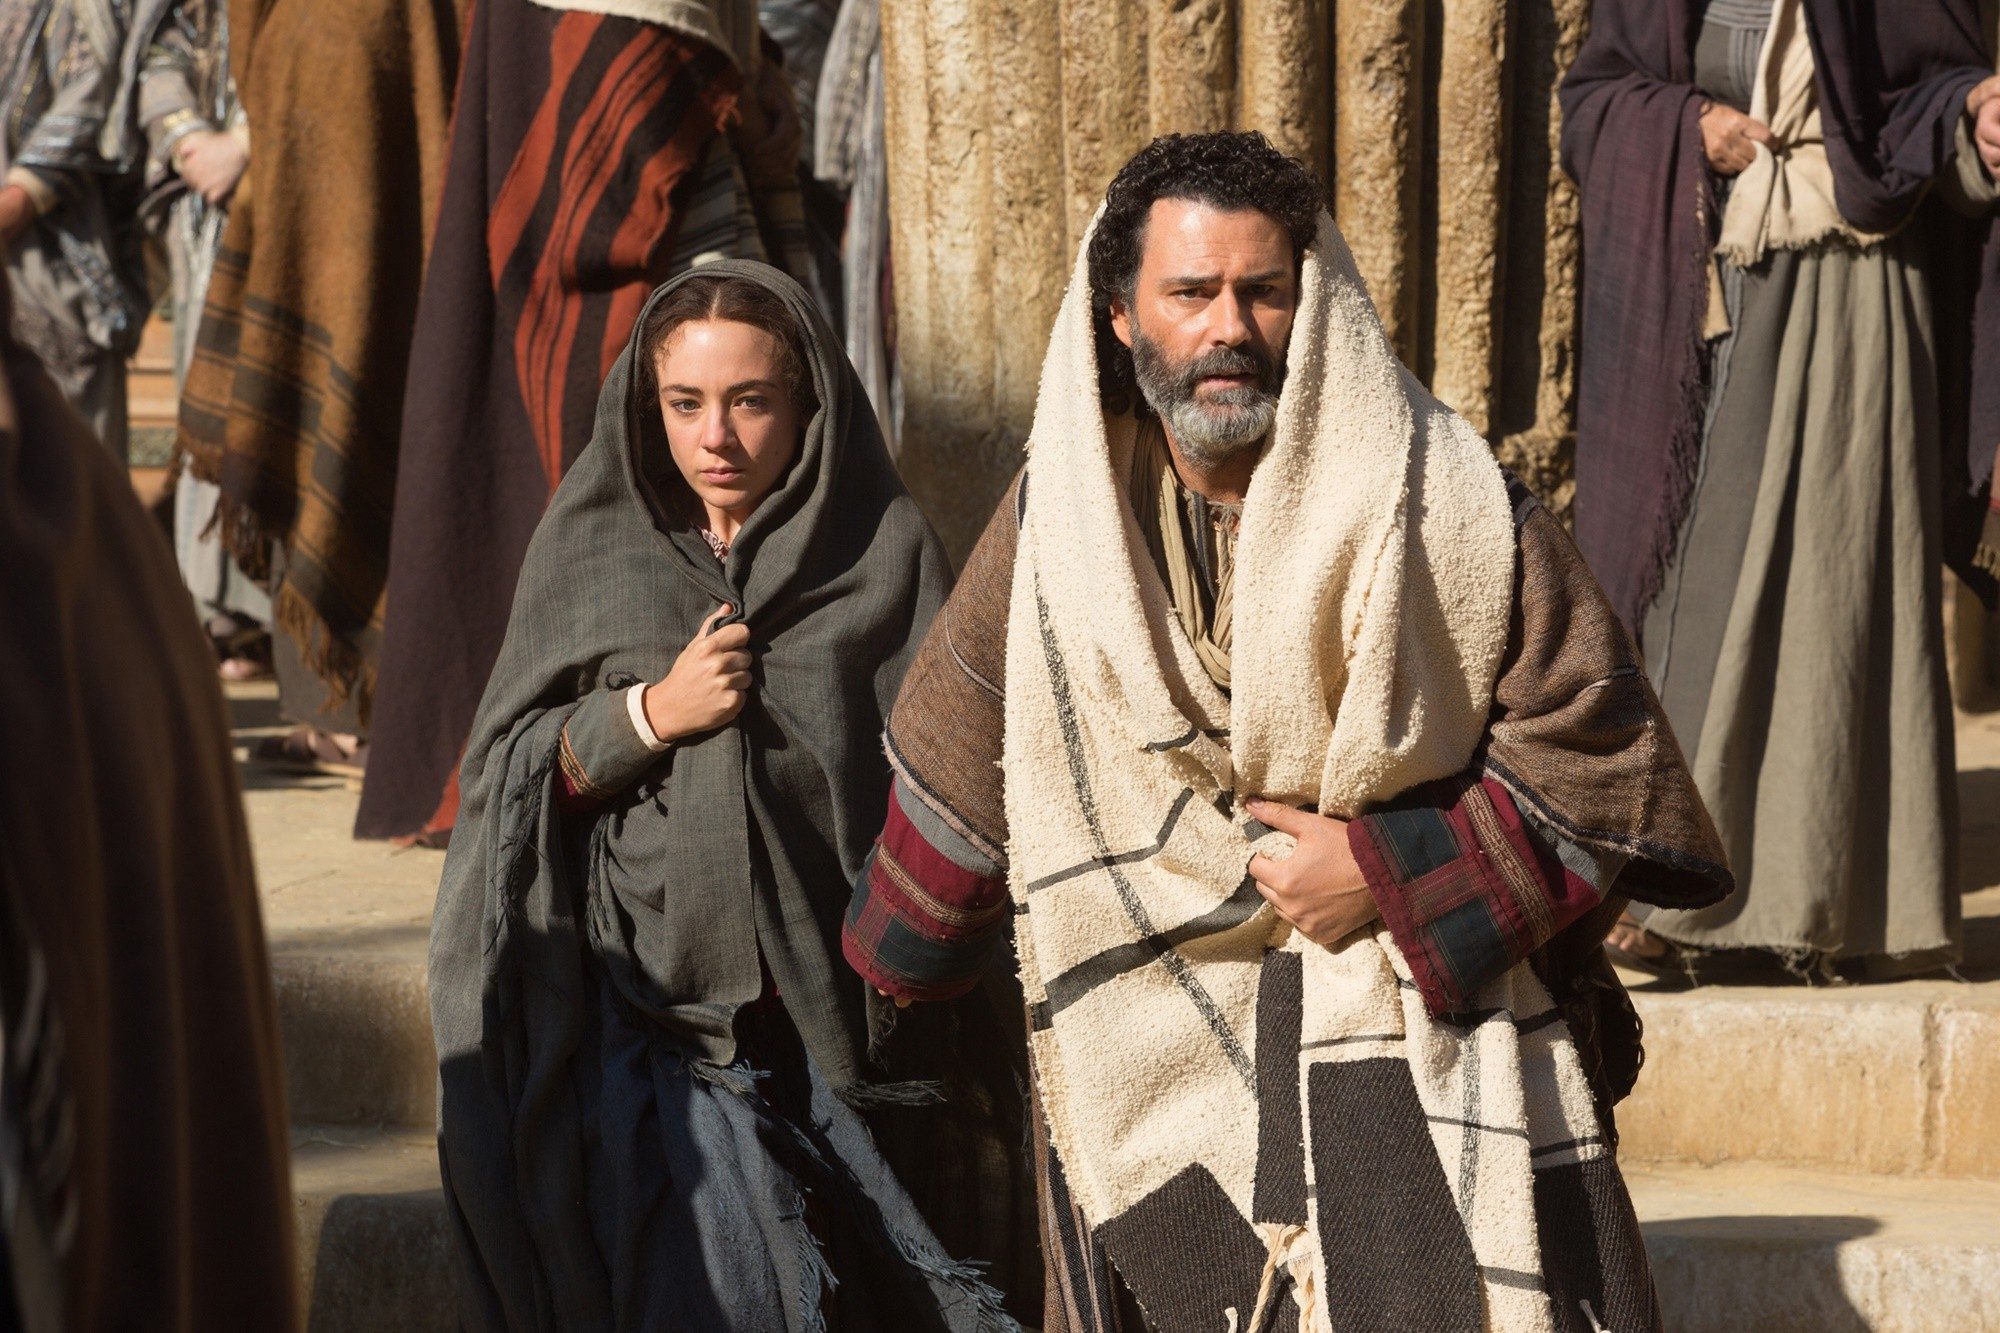 Sara Lazzaro stars as Mary and Vincent Walsh stars as Joseph in Focus Features' The Young Messiah (2015)